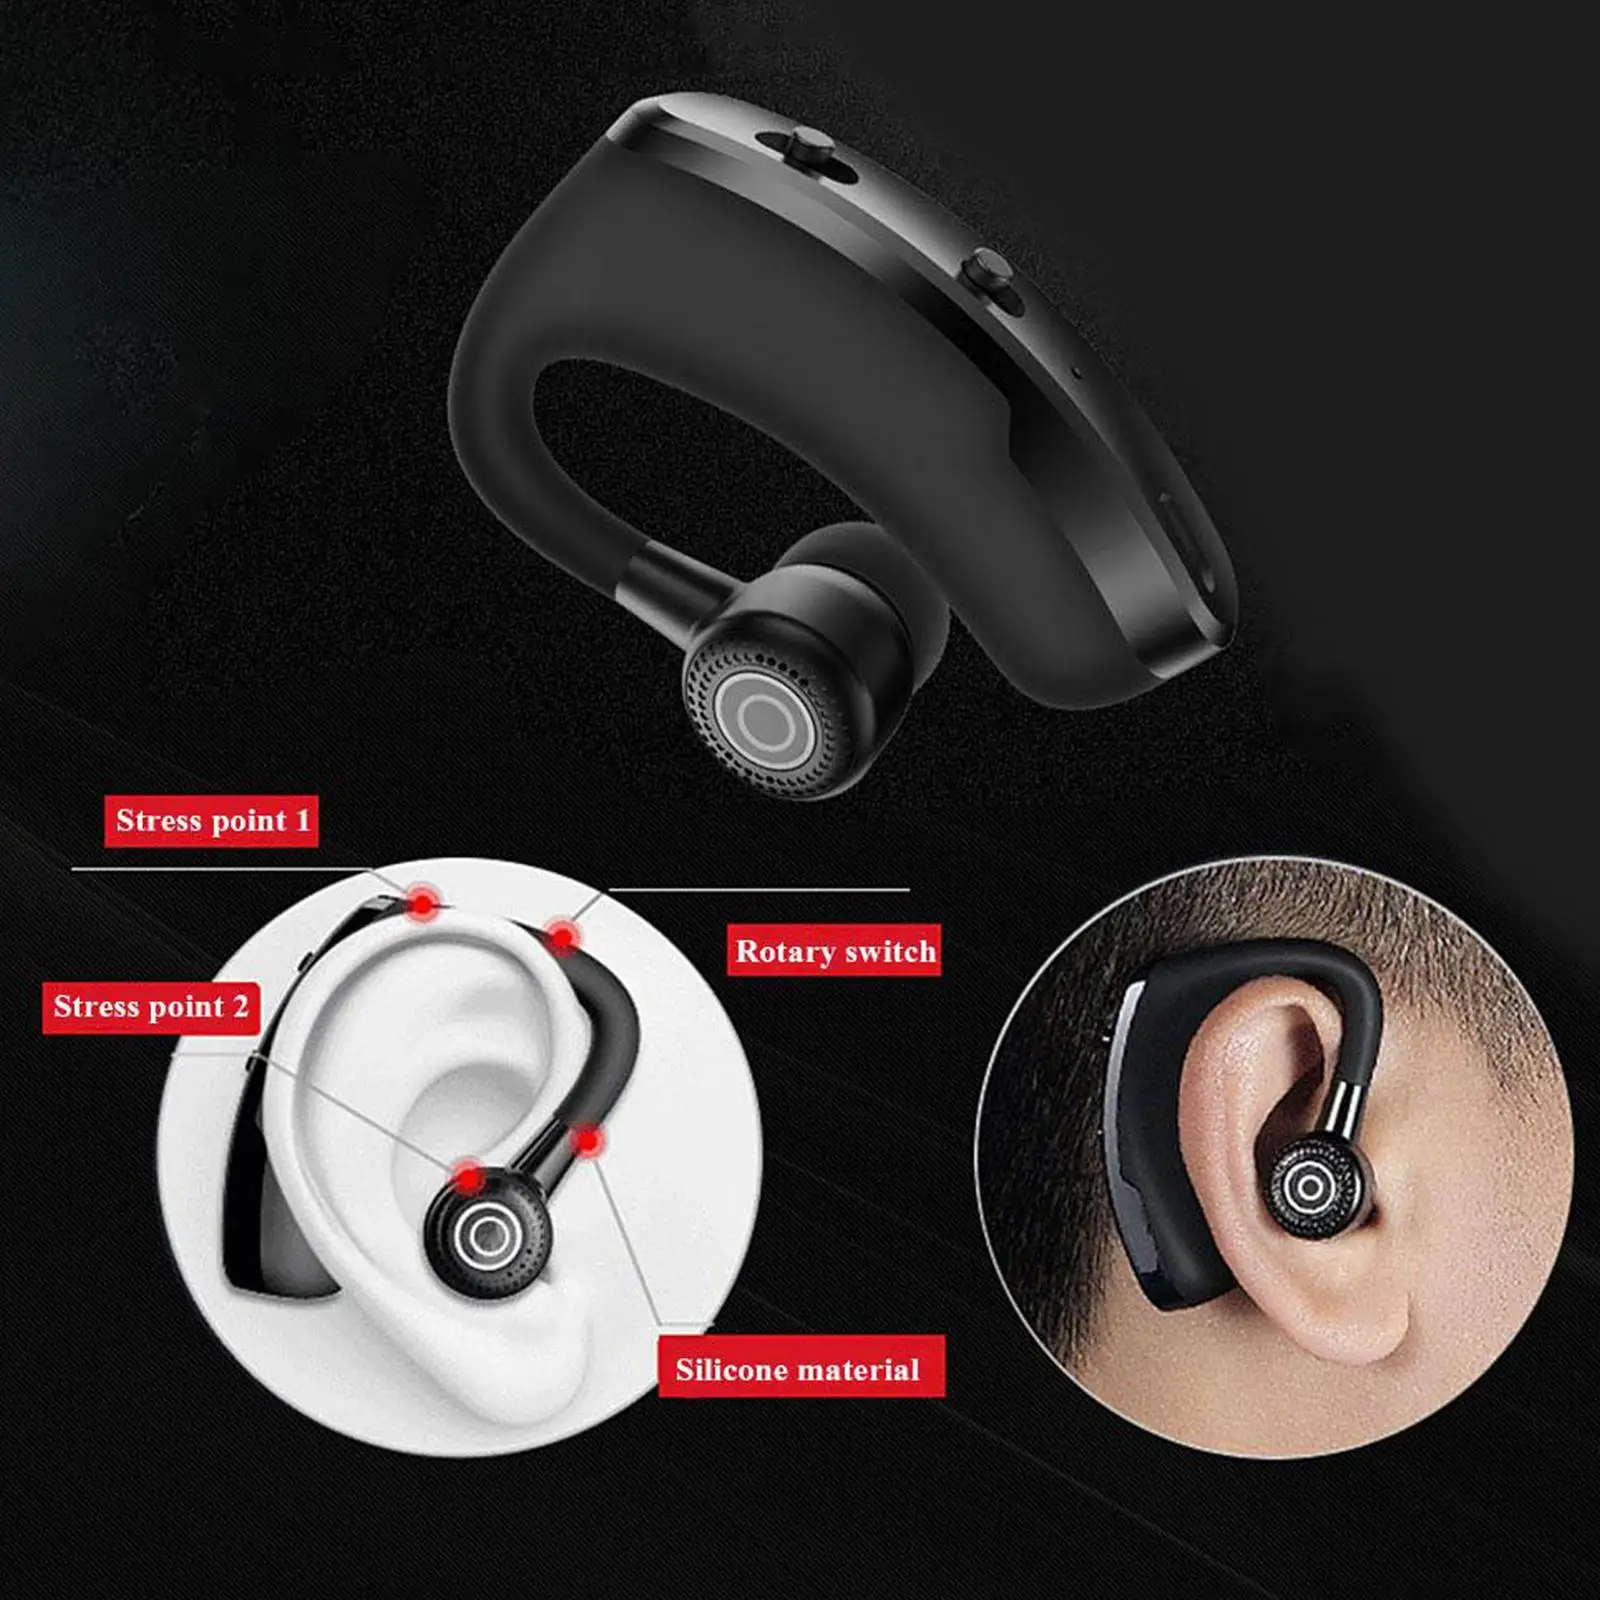 Earpiece V 4.0 Handsfree Headset 10 Hrs Driving Headset rs Standby Time for Android Laptop Trucker Driver V9